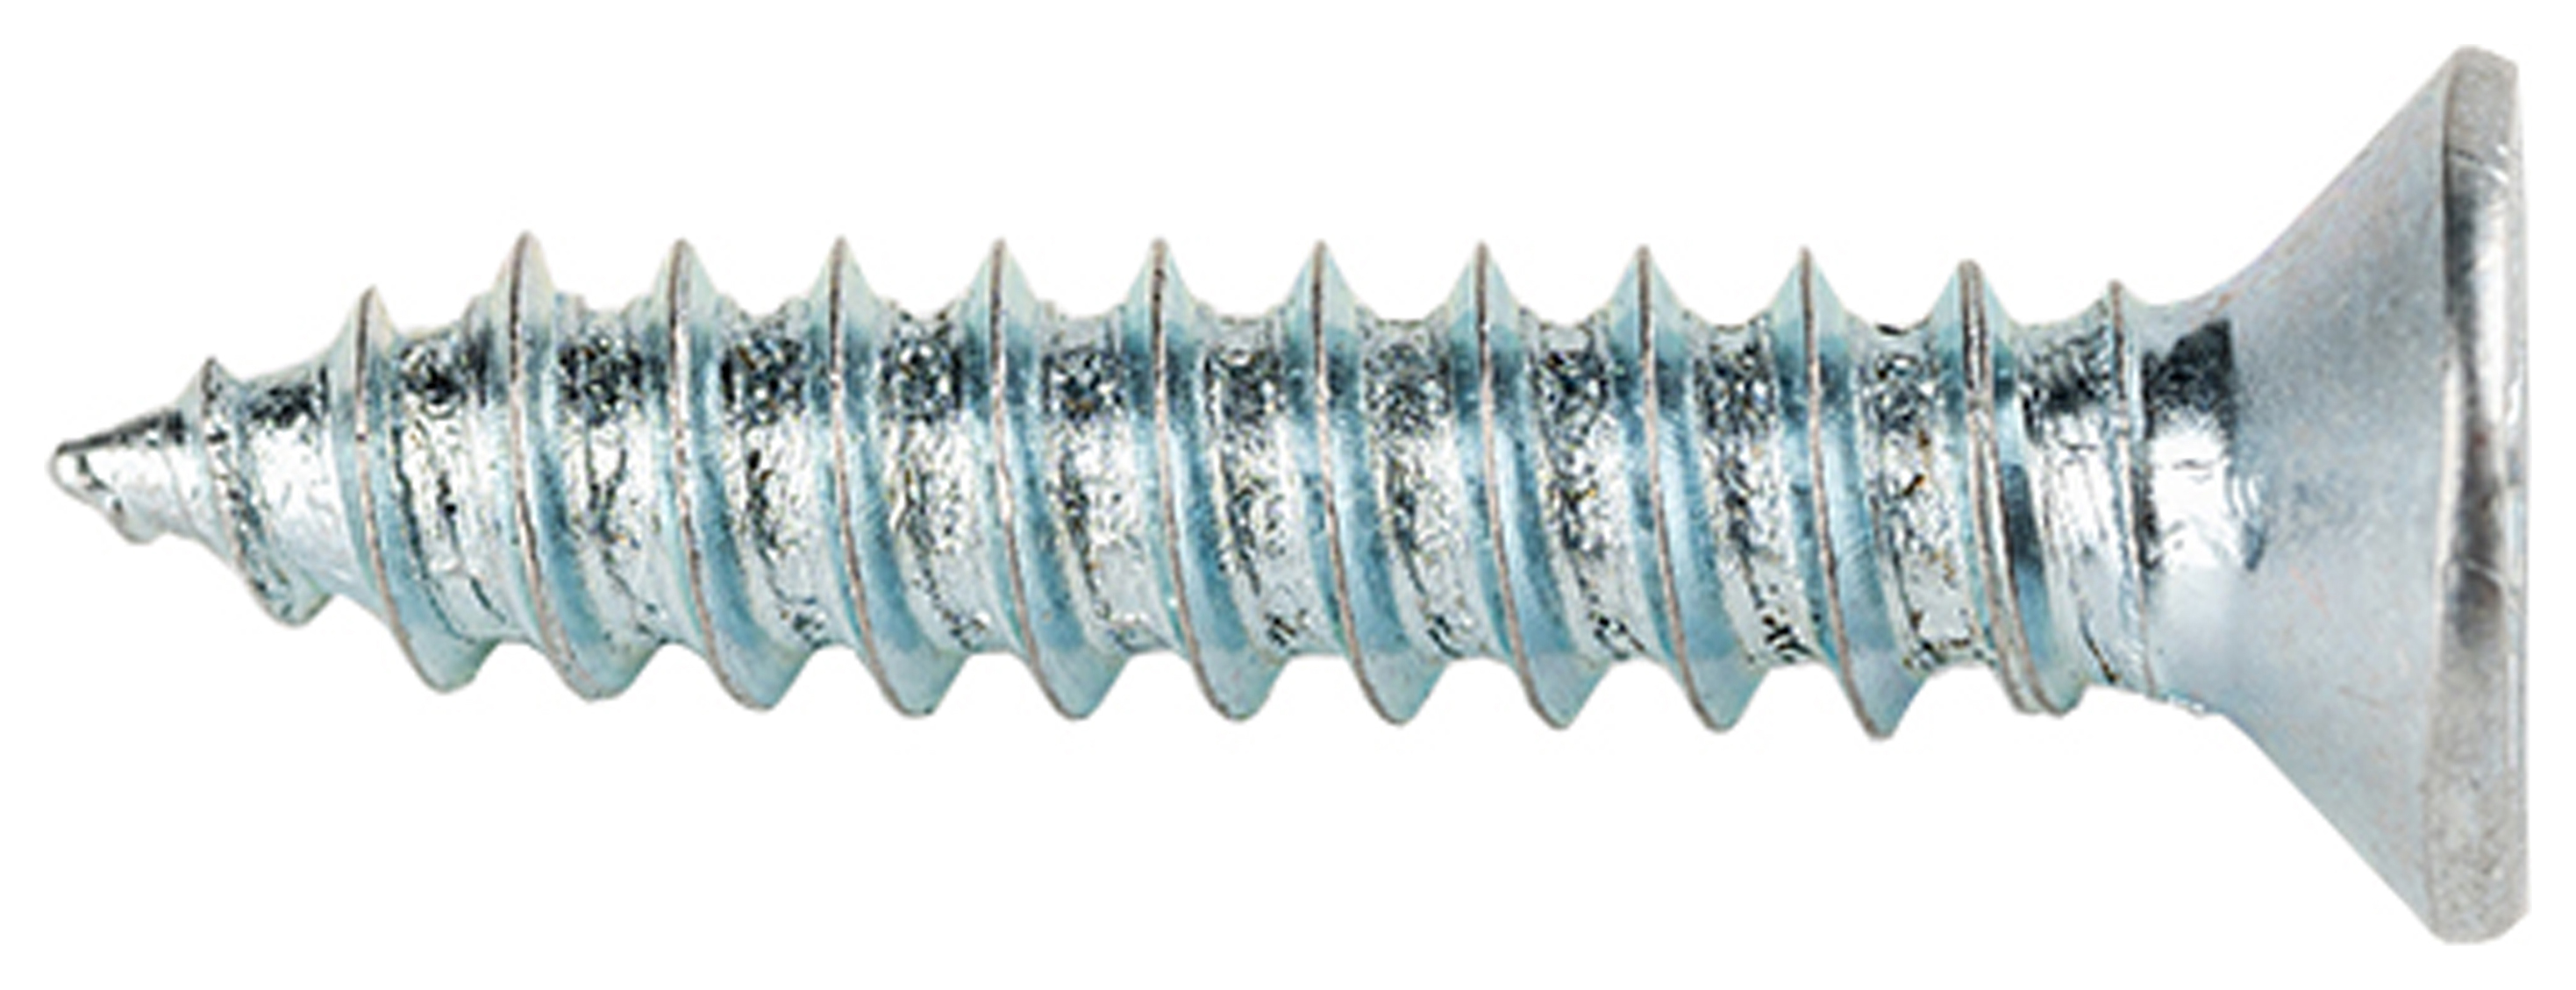 Wickes Self Tapping Countersunk Head Screws - 5 x 25mm - Pack of 100